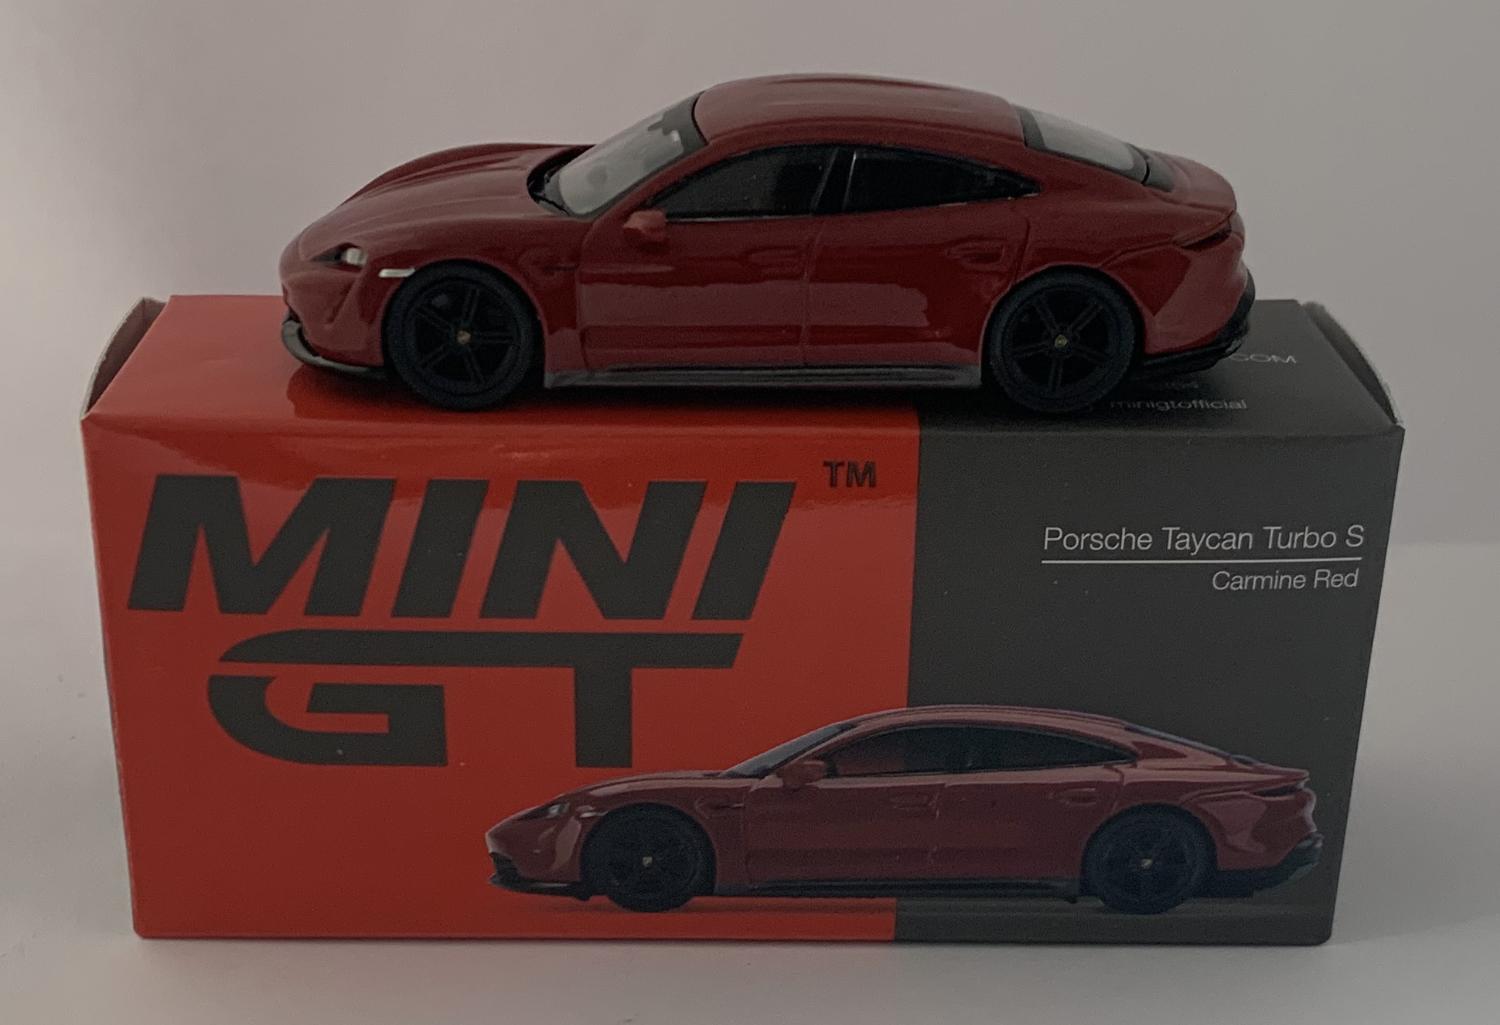 A good reproduction of the Porsche Taycan Turbo S with detail throughout, all authentically recreated. The model is presented in a box, the car is approx. 8 cm long and the box is 10 cm long